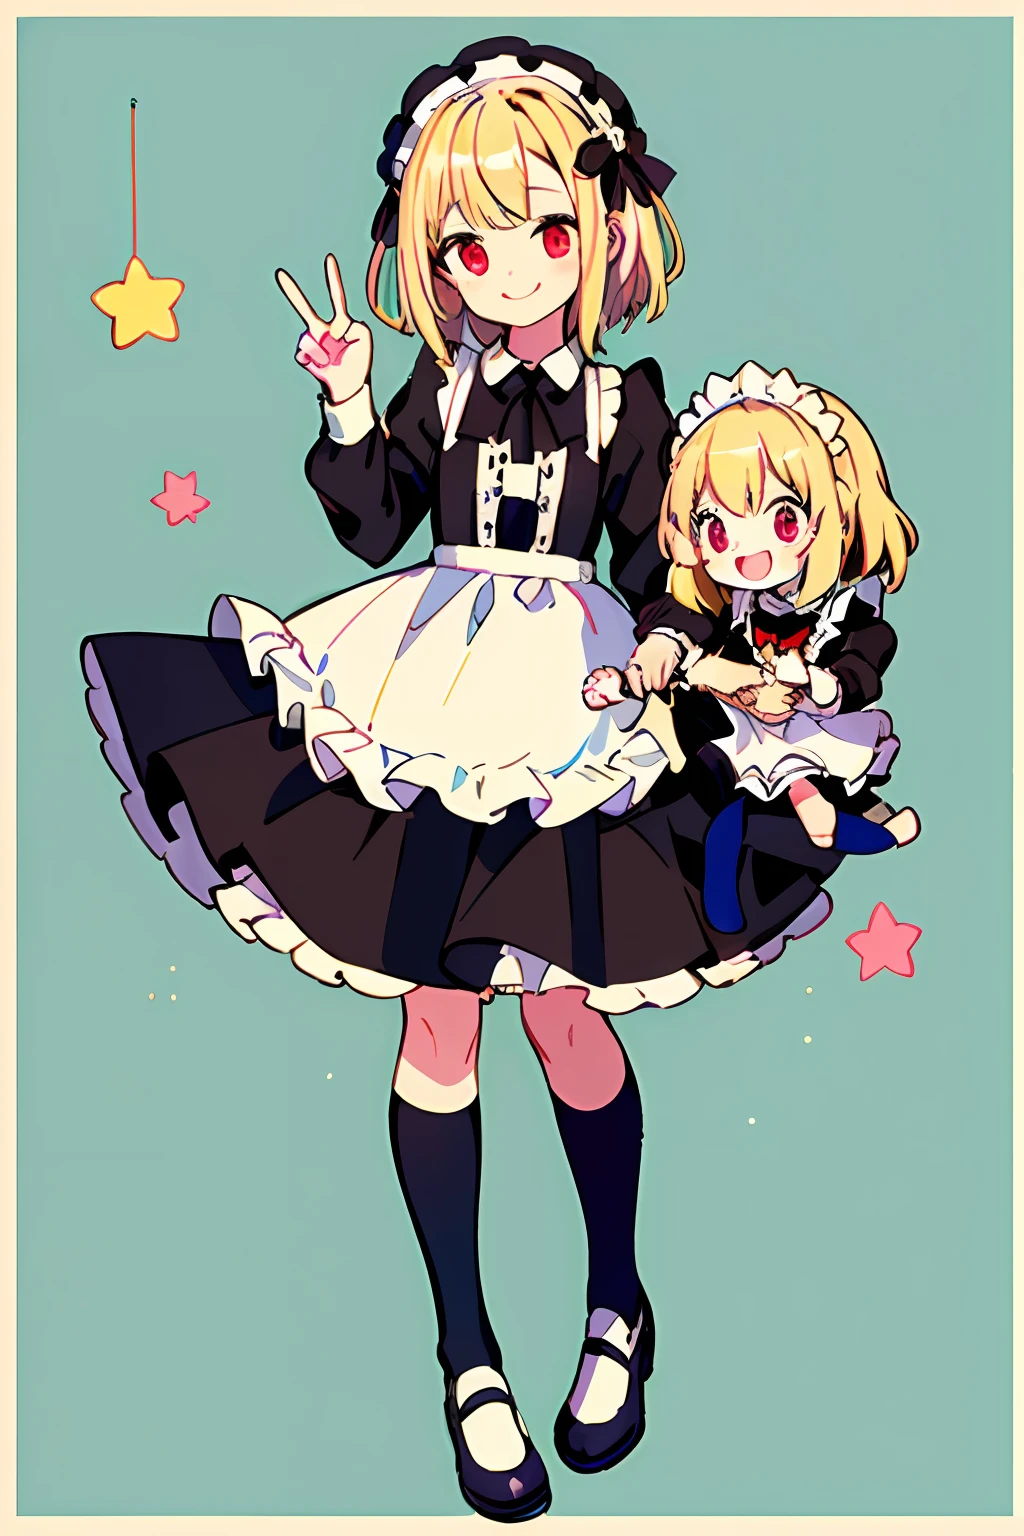 (masterpiece), best quality, an adorable and heartwarming depiction of sisterhood, (1girl) with beautiful blonde hair and red eyes in a cute maid dress, (medium hair), (smiling) and making a peace sign, standing next to her big sister with expressionless face and gorgeous long blonde hair, (lolli), (female child), full body shot with a dynamic pose.